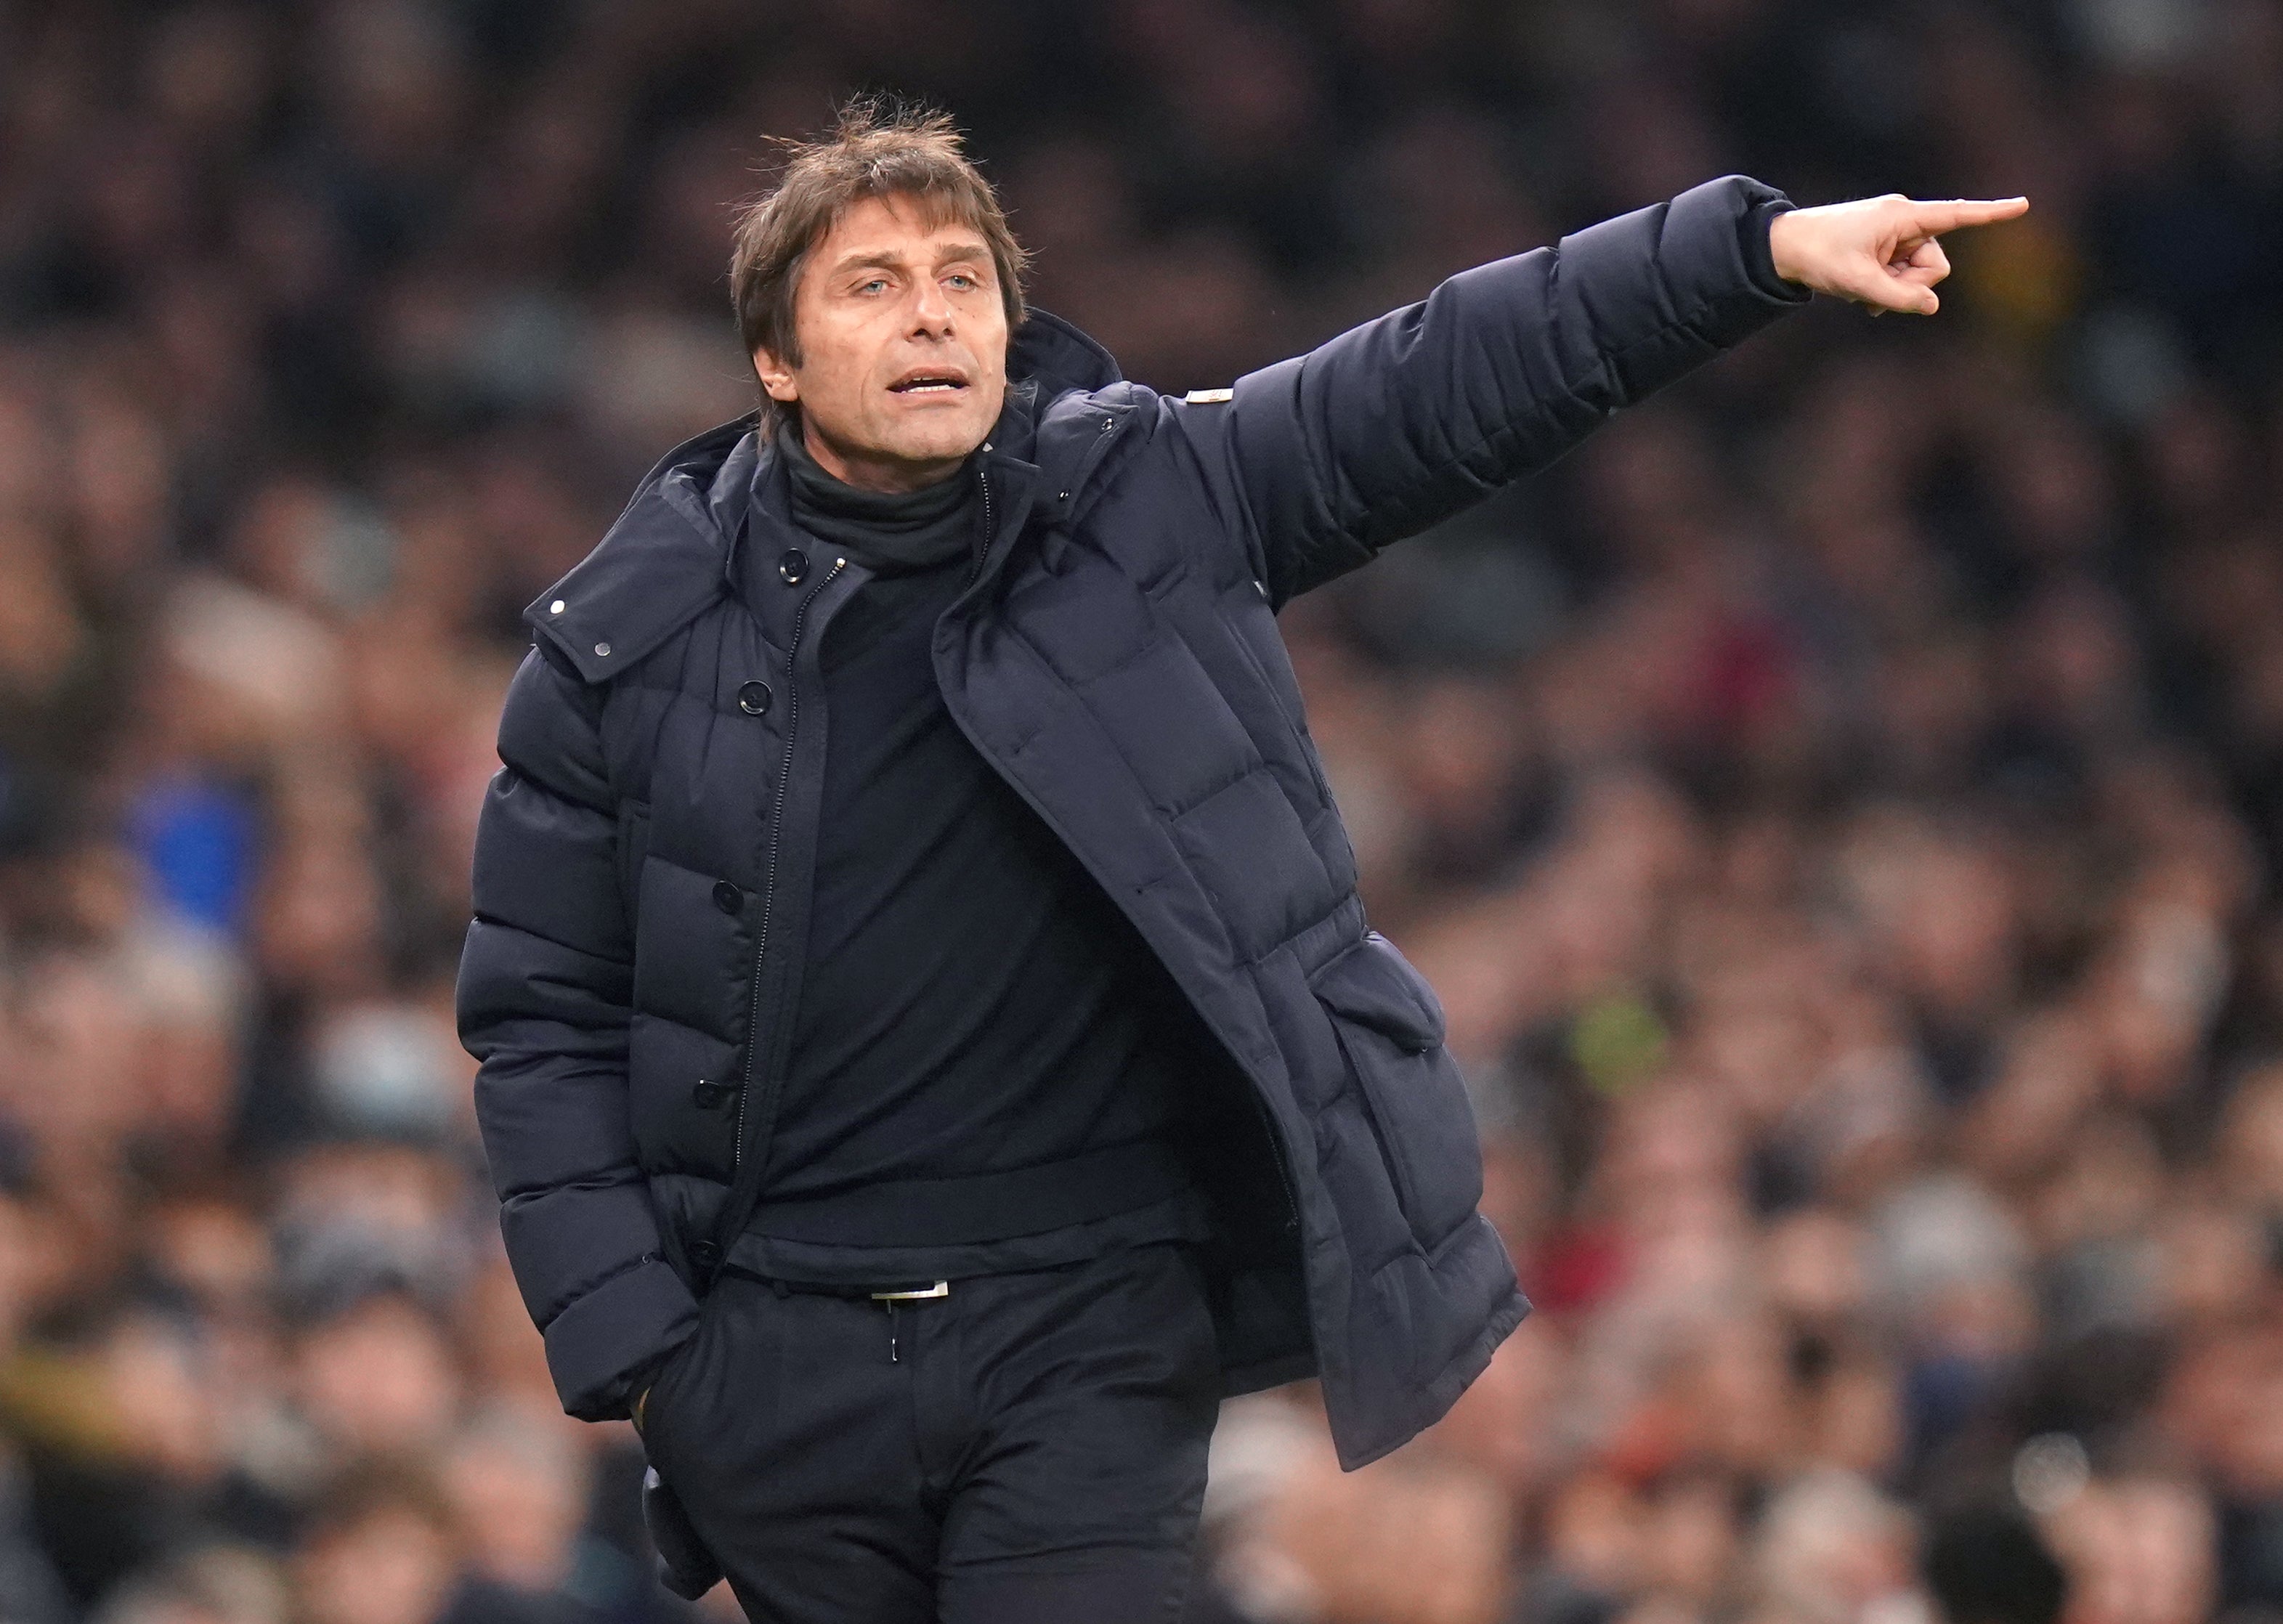 Antonio Conte suggested he was not the right man for the Tottenham job after the Burnley defeat in midweek (Adam Davy/PA)